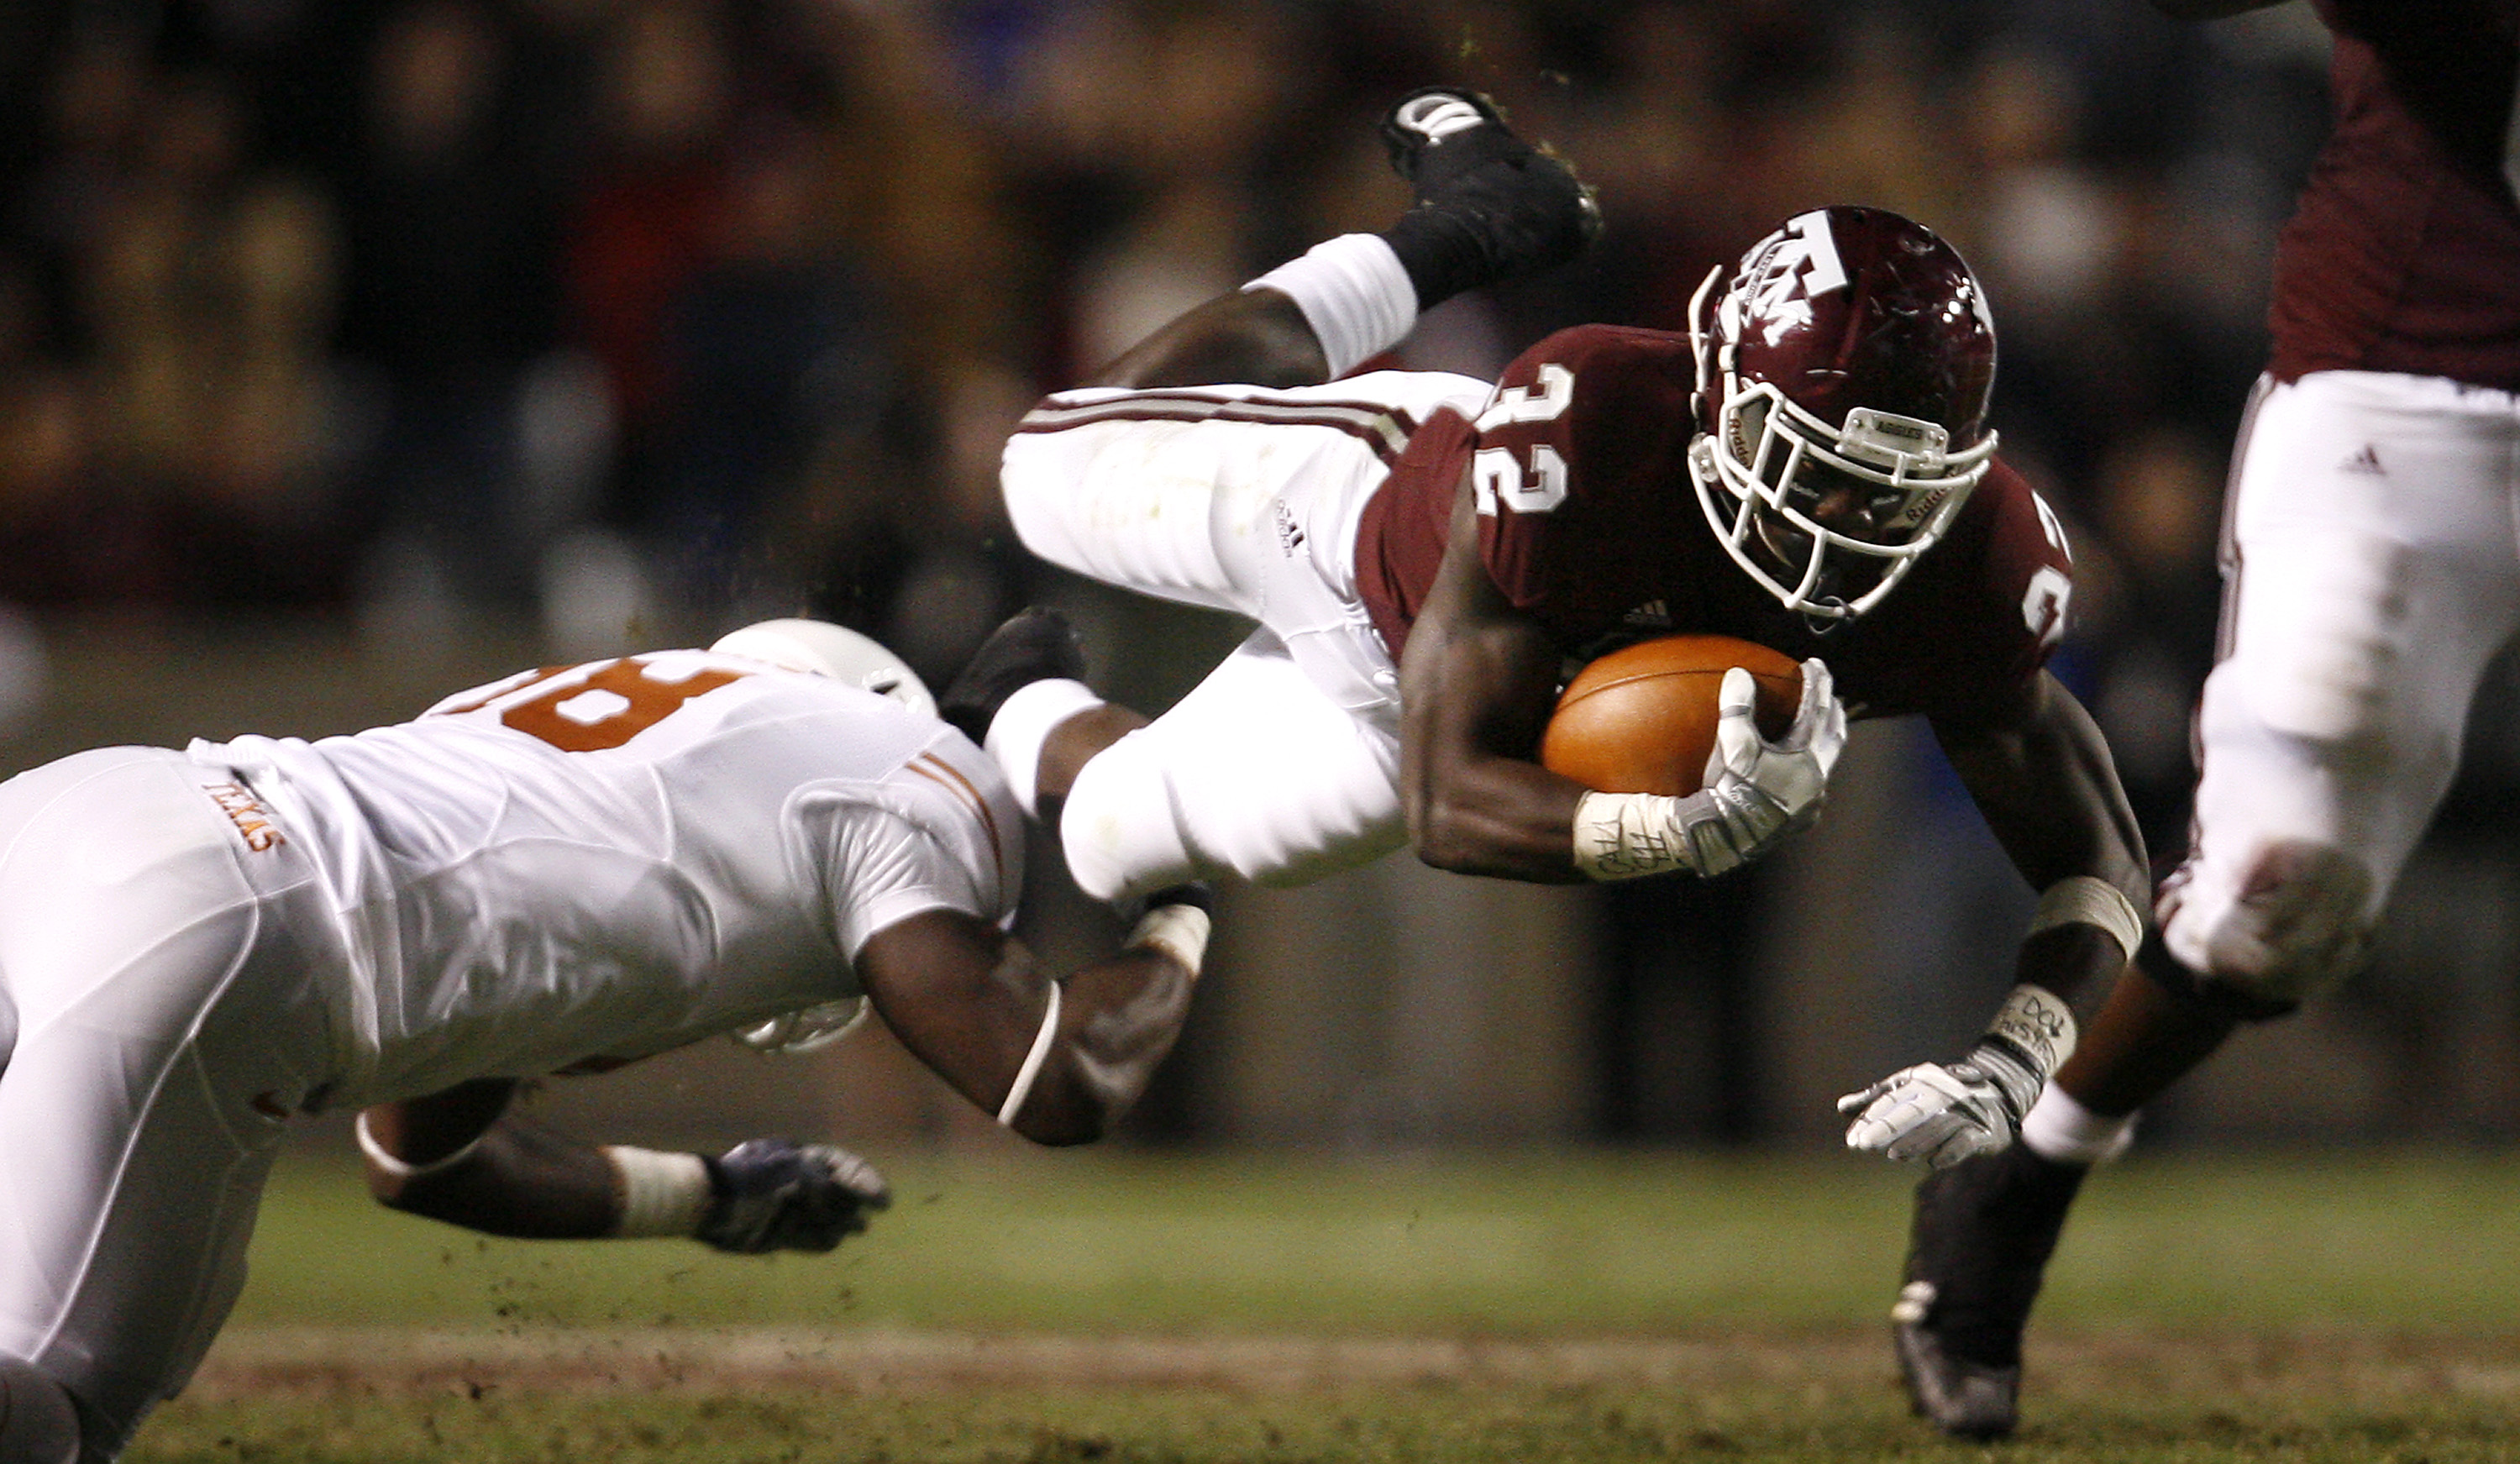 COLLEGE STATION, TX - NOVEMBER 26: Tailback Cyrus Gray #32 of the Texas A&M Aggies is tripped up by a Texas Longhorns defender in the second half at Kyle Field on November 26, 2009 in College Station, Texas. The Longhorns defeated the Aggies 49-39. (Photo